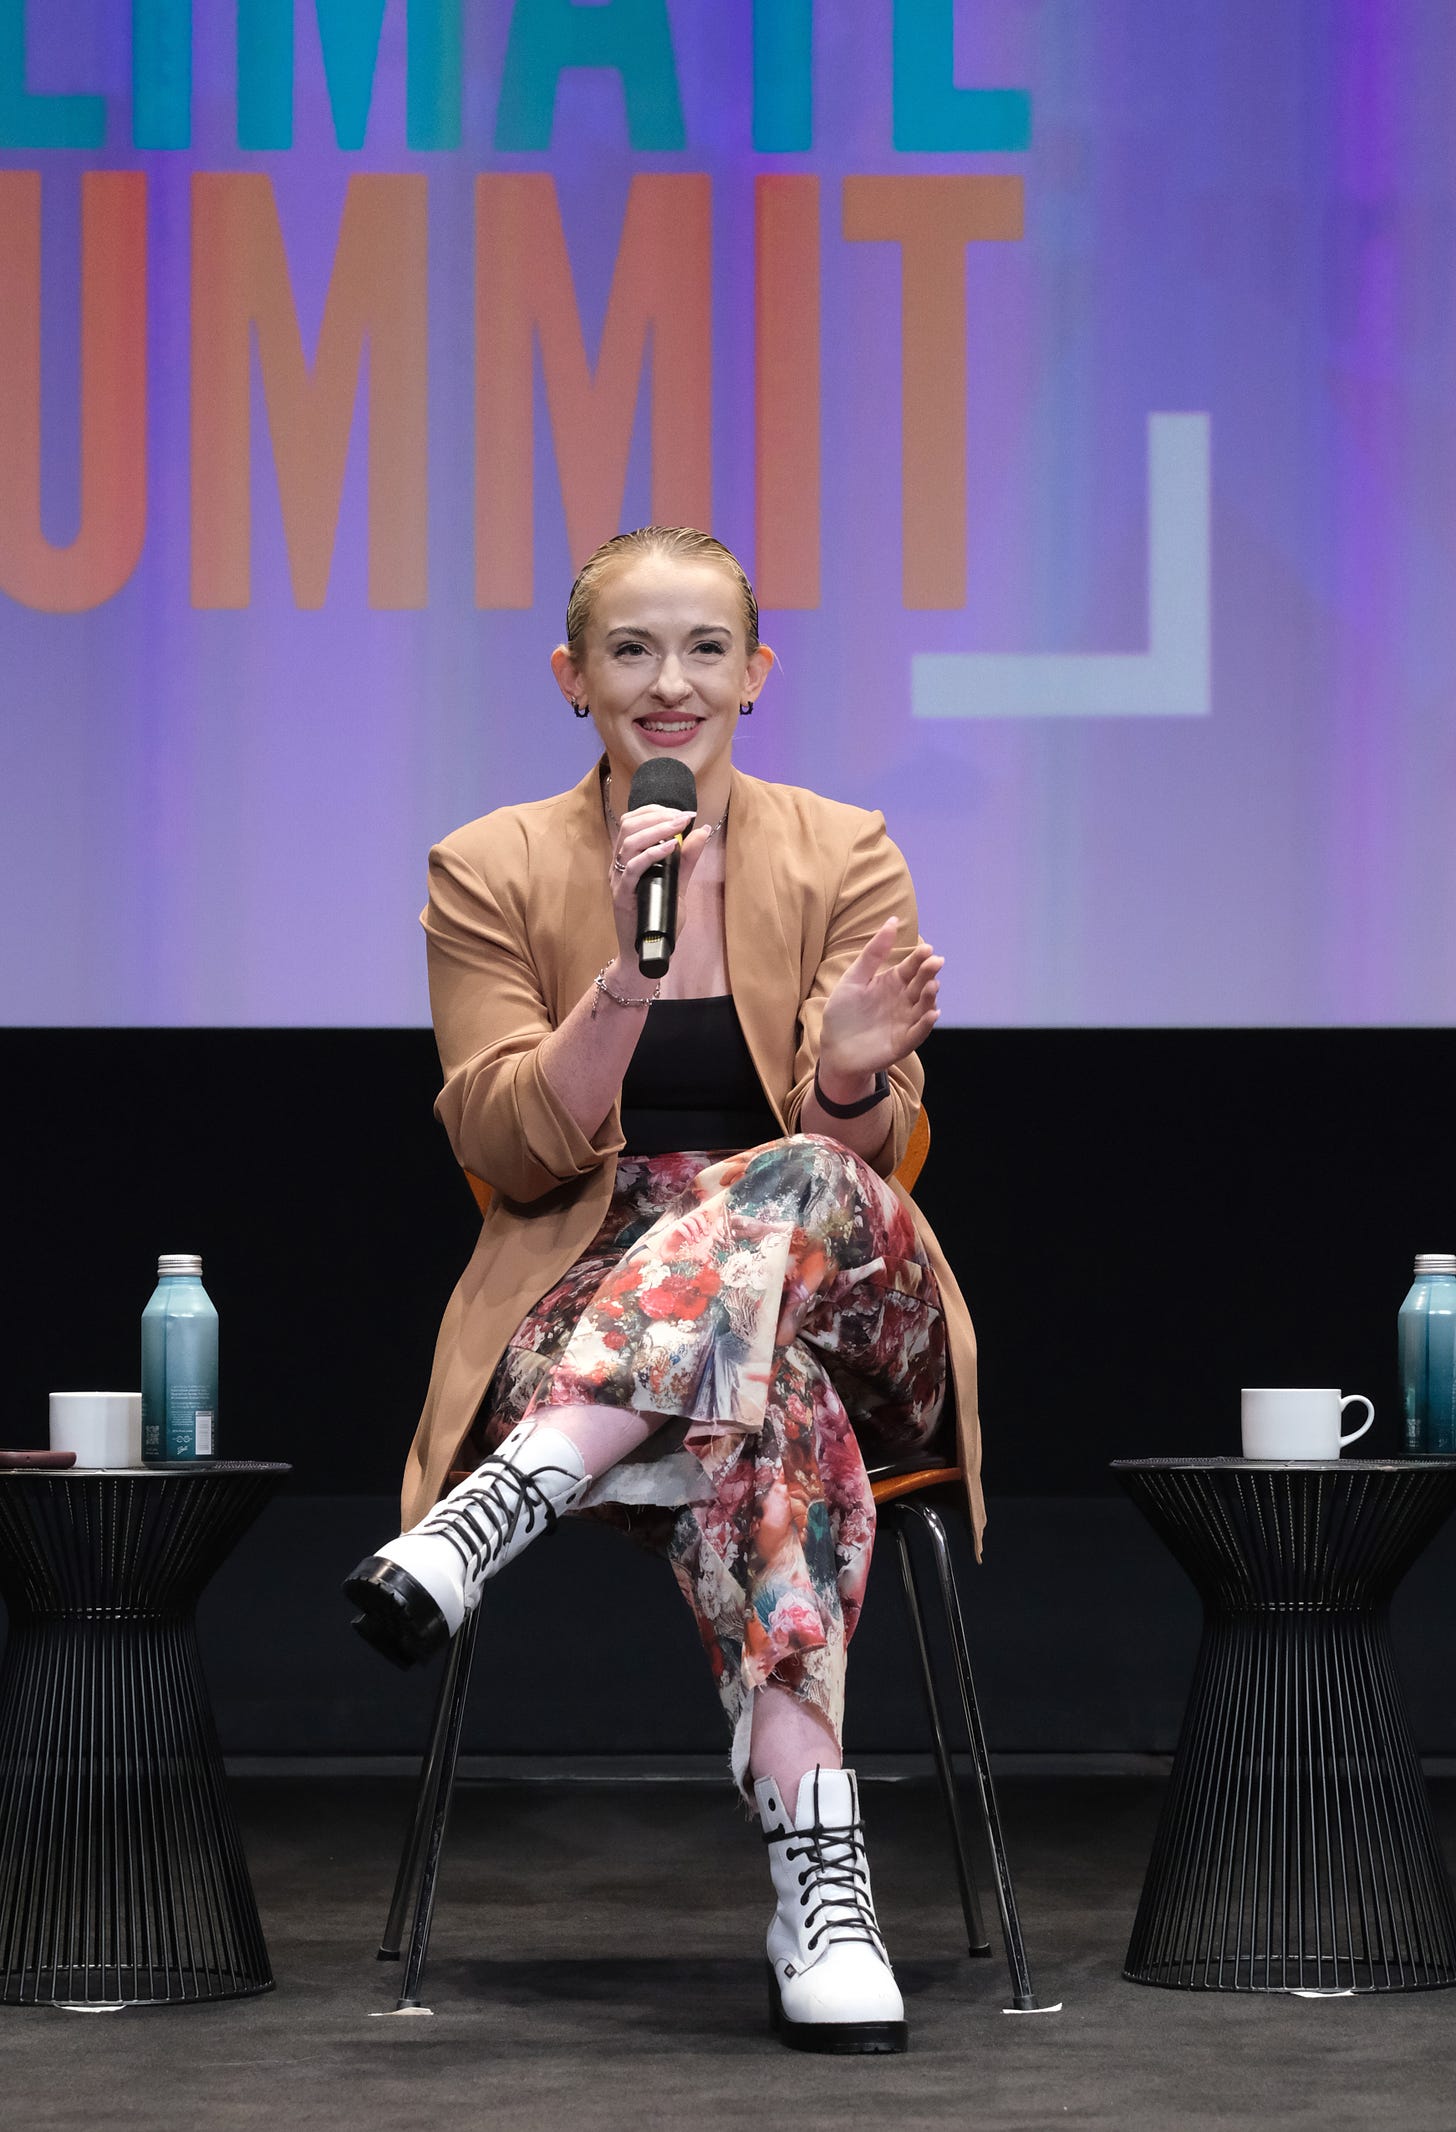 A blonde woman with slicked back hair is sitting on stage holding a microphone. She is wearing a camel-colored jacket, black tank top, and brightly patterned pants with white boots. Behind her is a purple digital screen that says "Climate Summit."